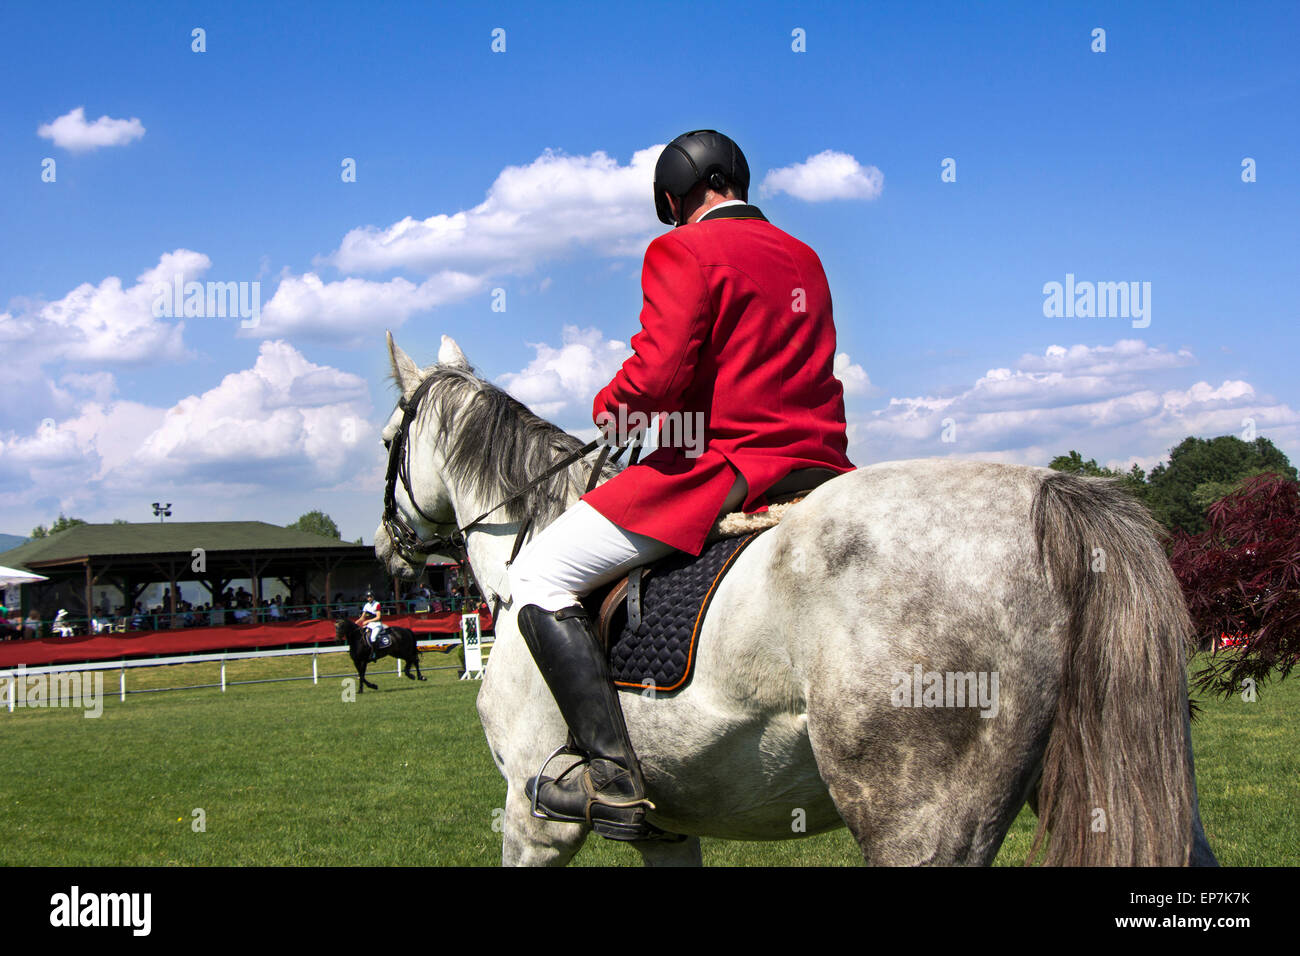 A rider on horseback competing in equestrian tournament Stock Photo